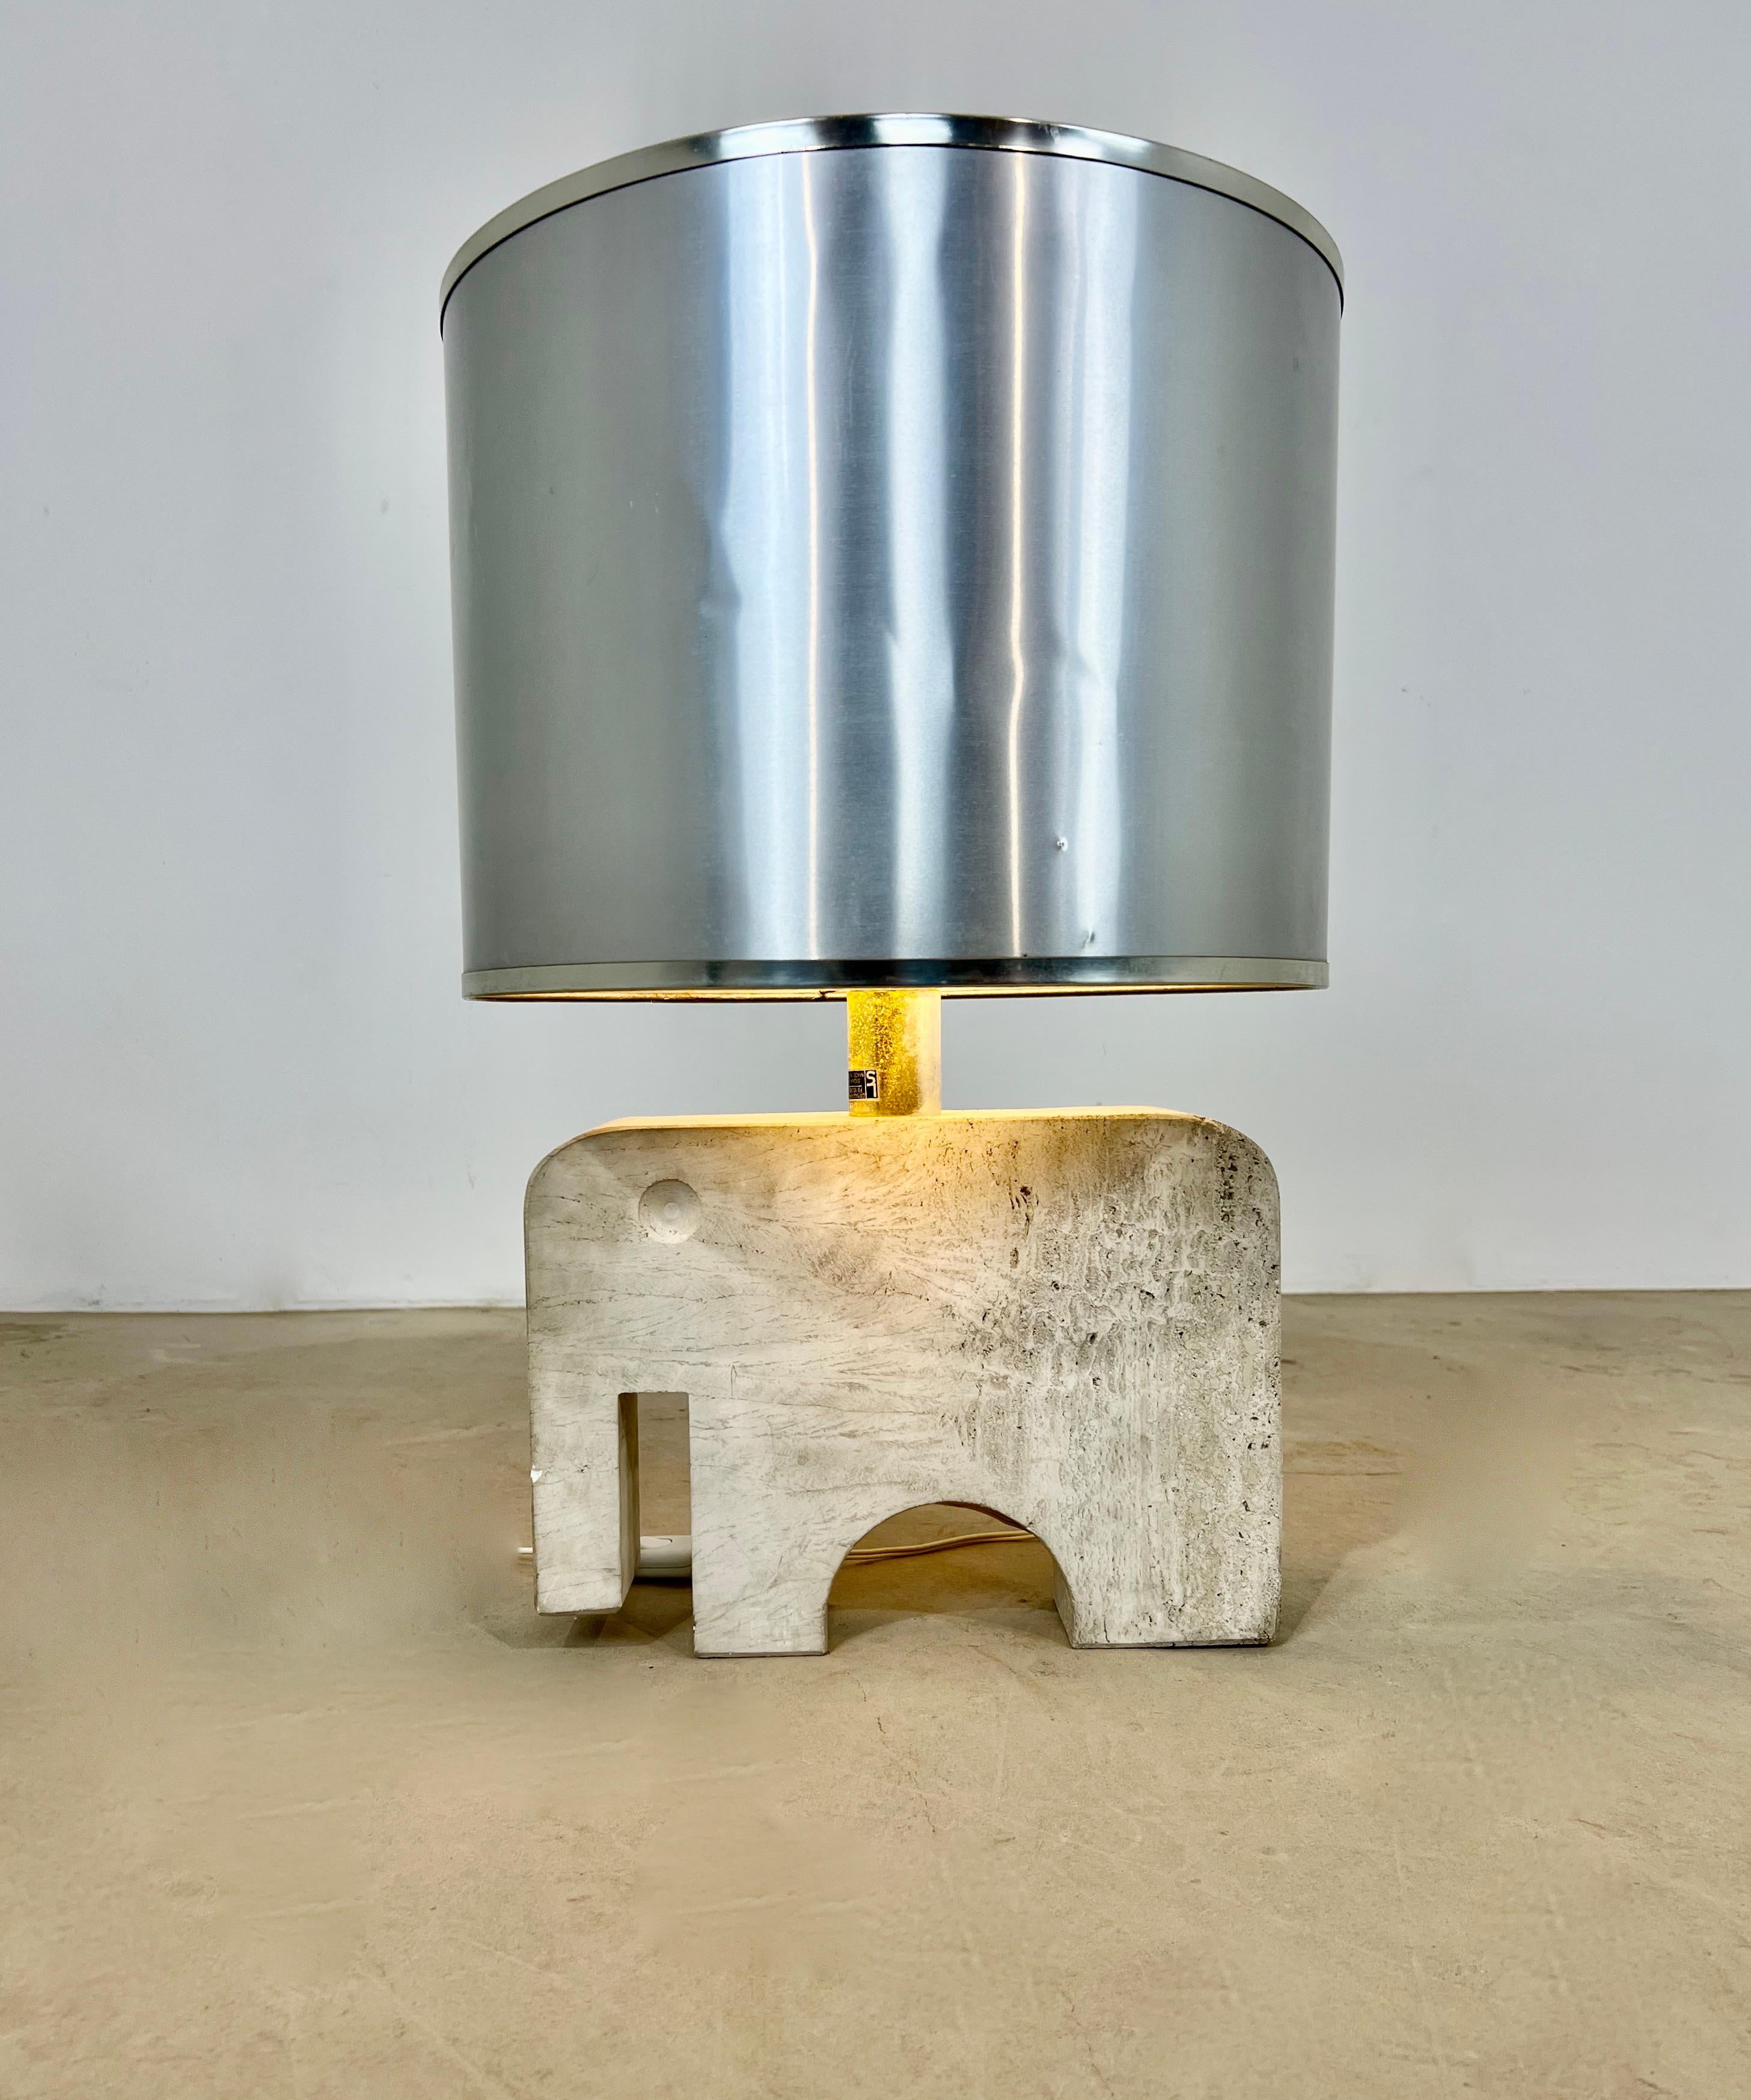 Elephant in travertine, metal lampshade. Wear due to time (see photo).